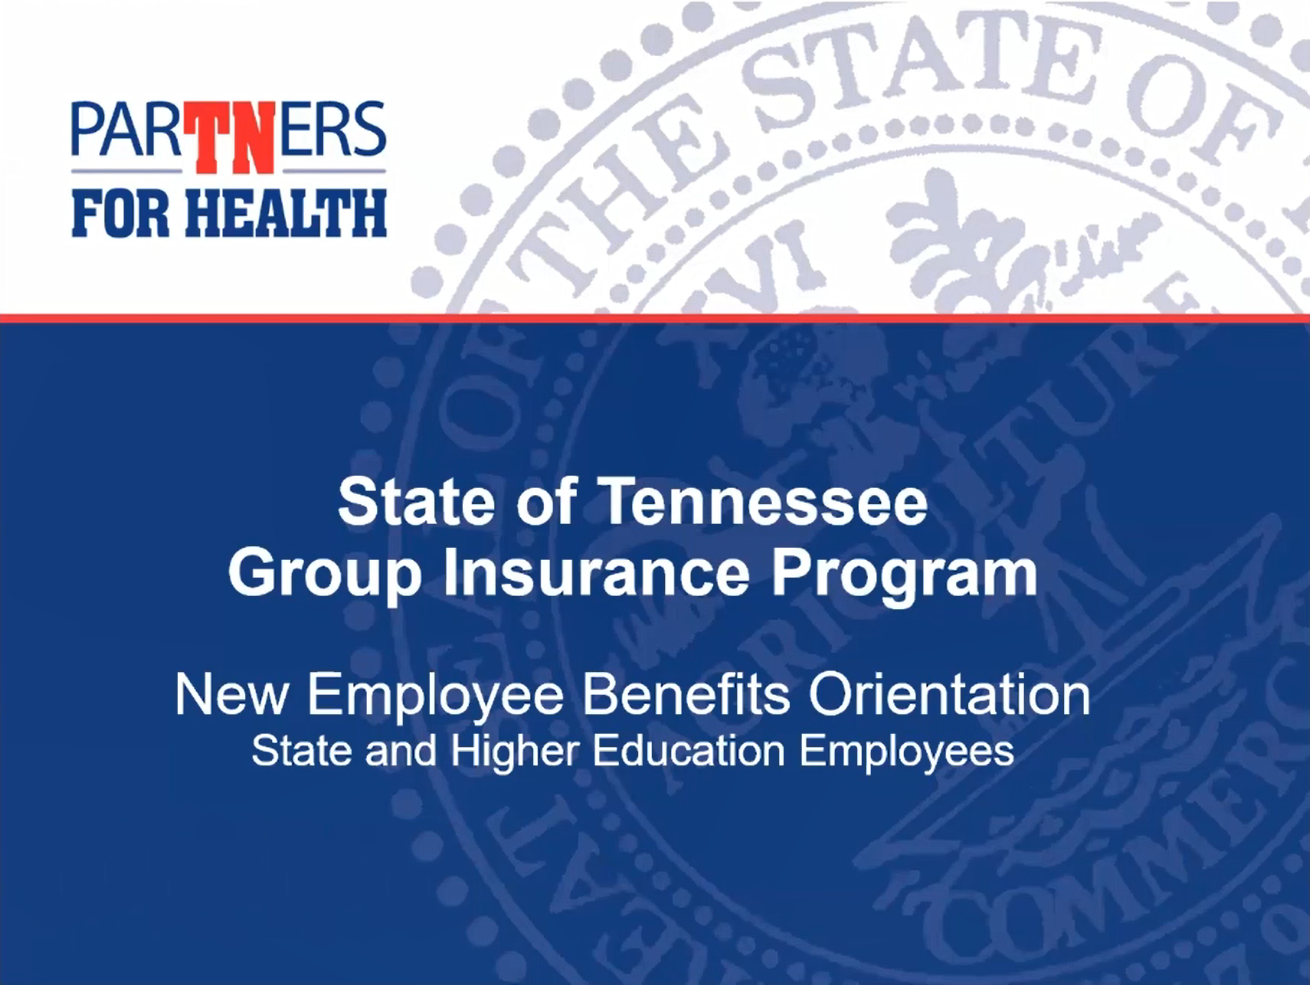 UTHSC Human Resources presents the State of Tennessee Group Insurance Program